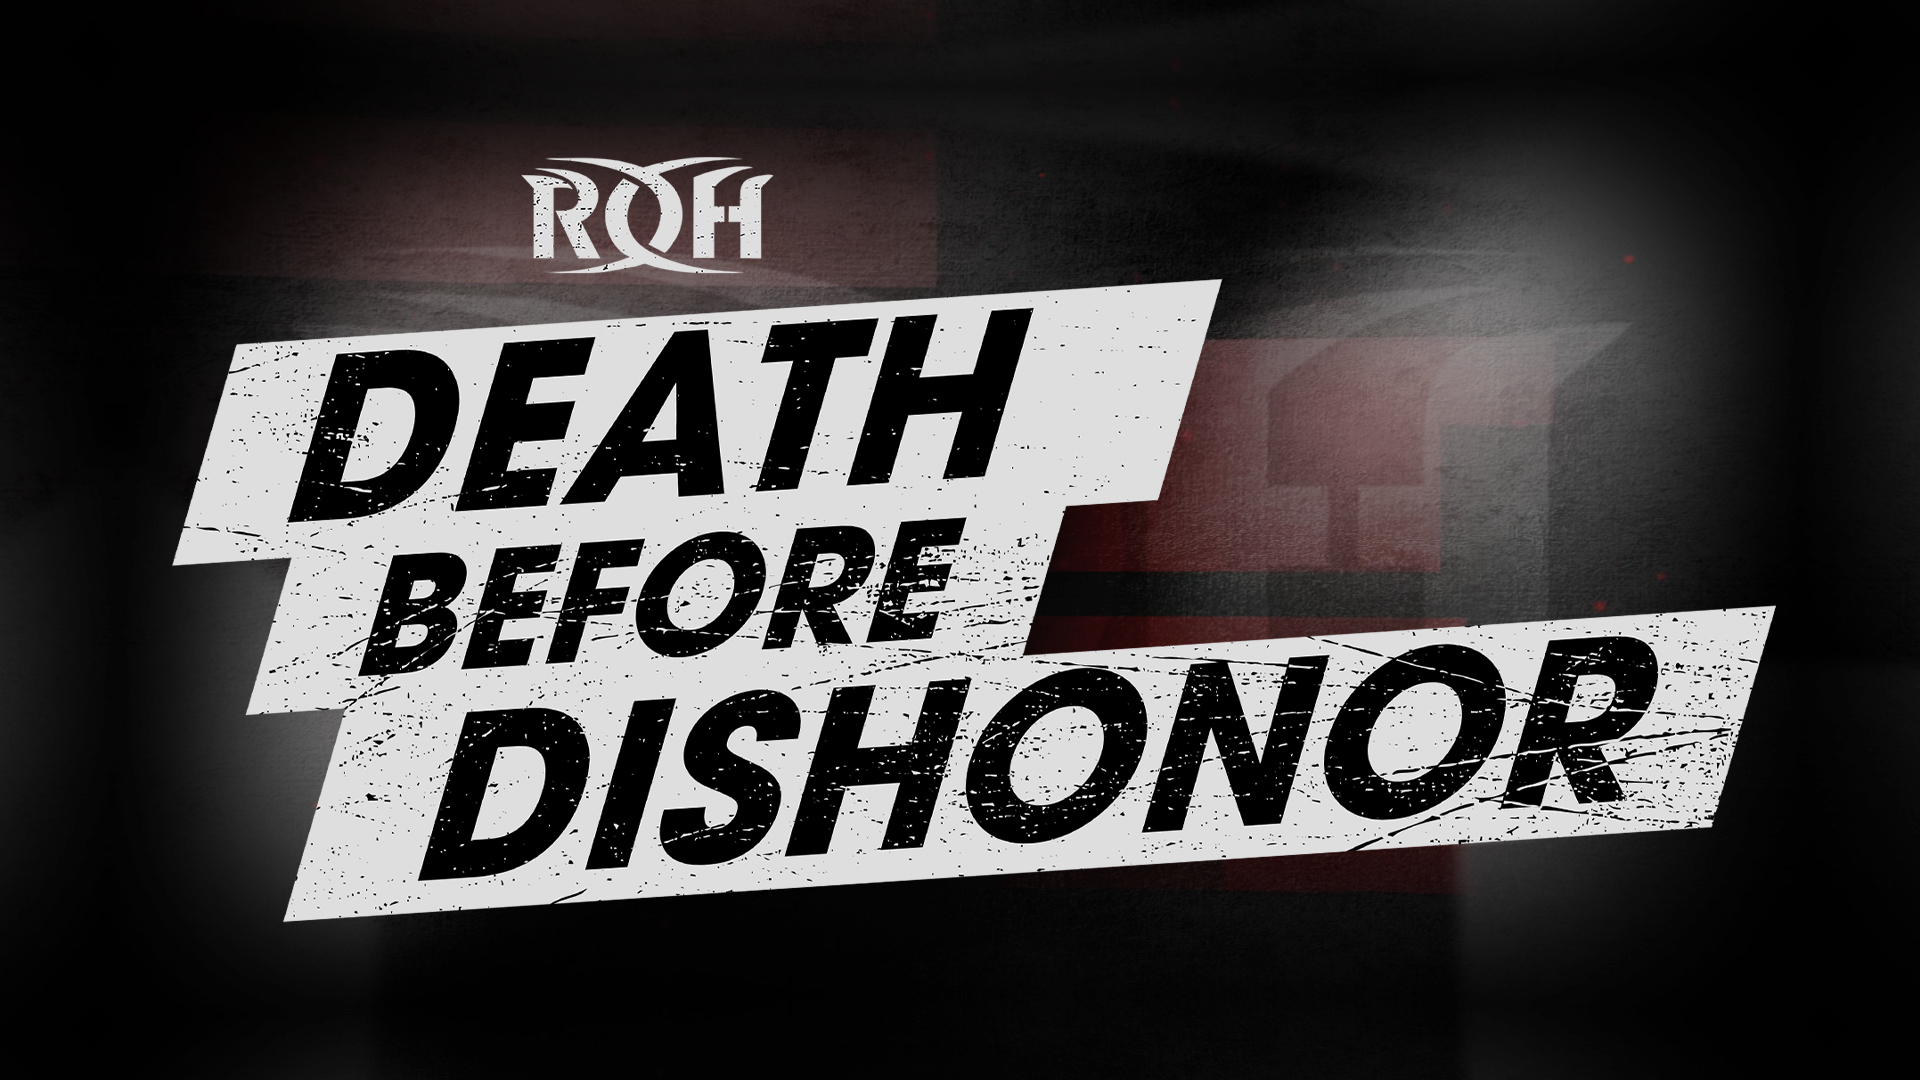 ROH Death Before Dishonor 2021 Moved To 2300 Arena